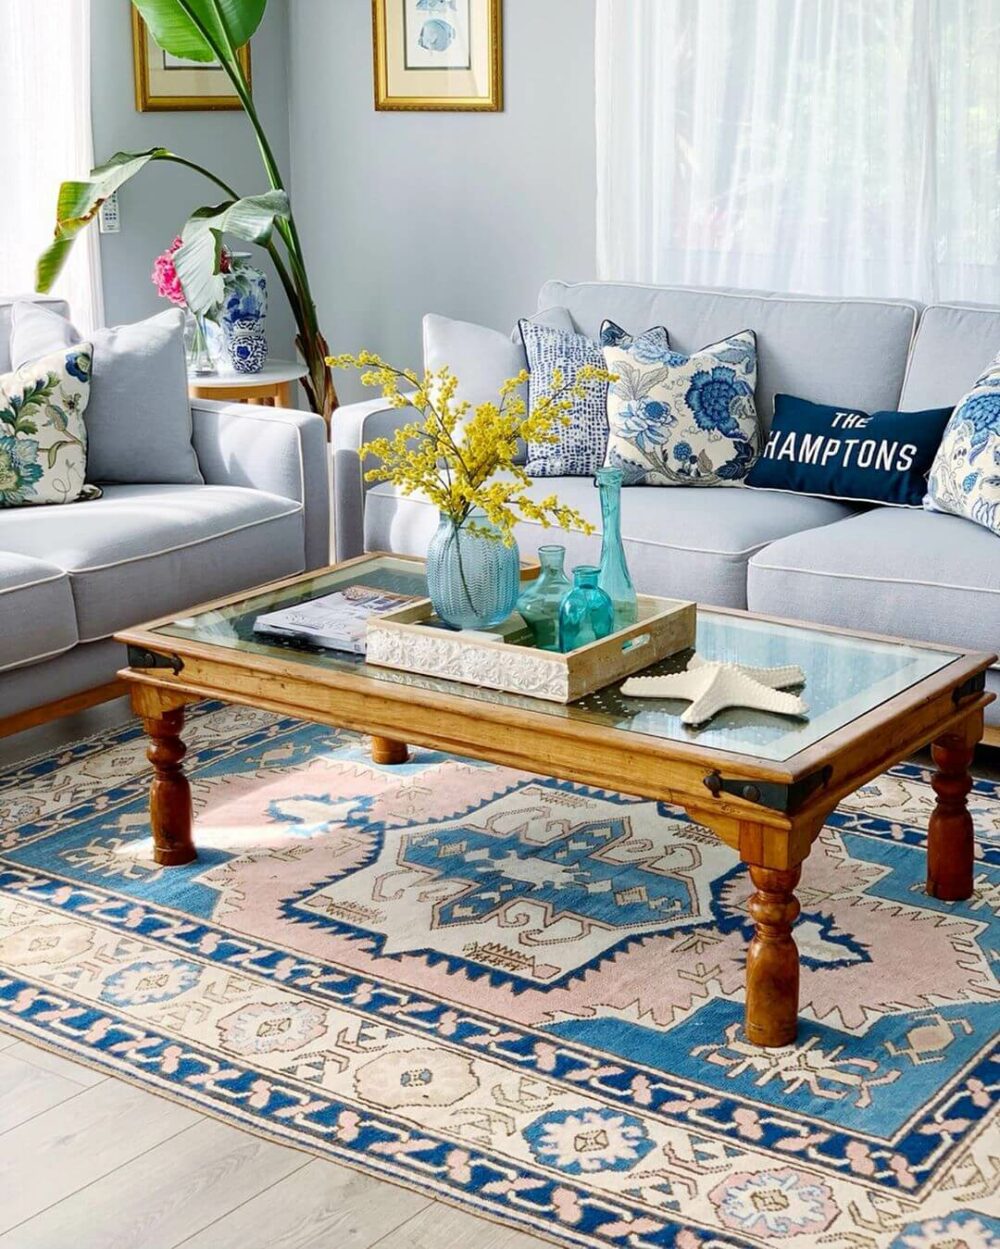 area rug ideas for small living room